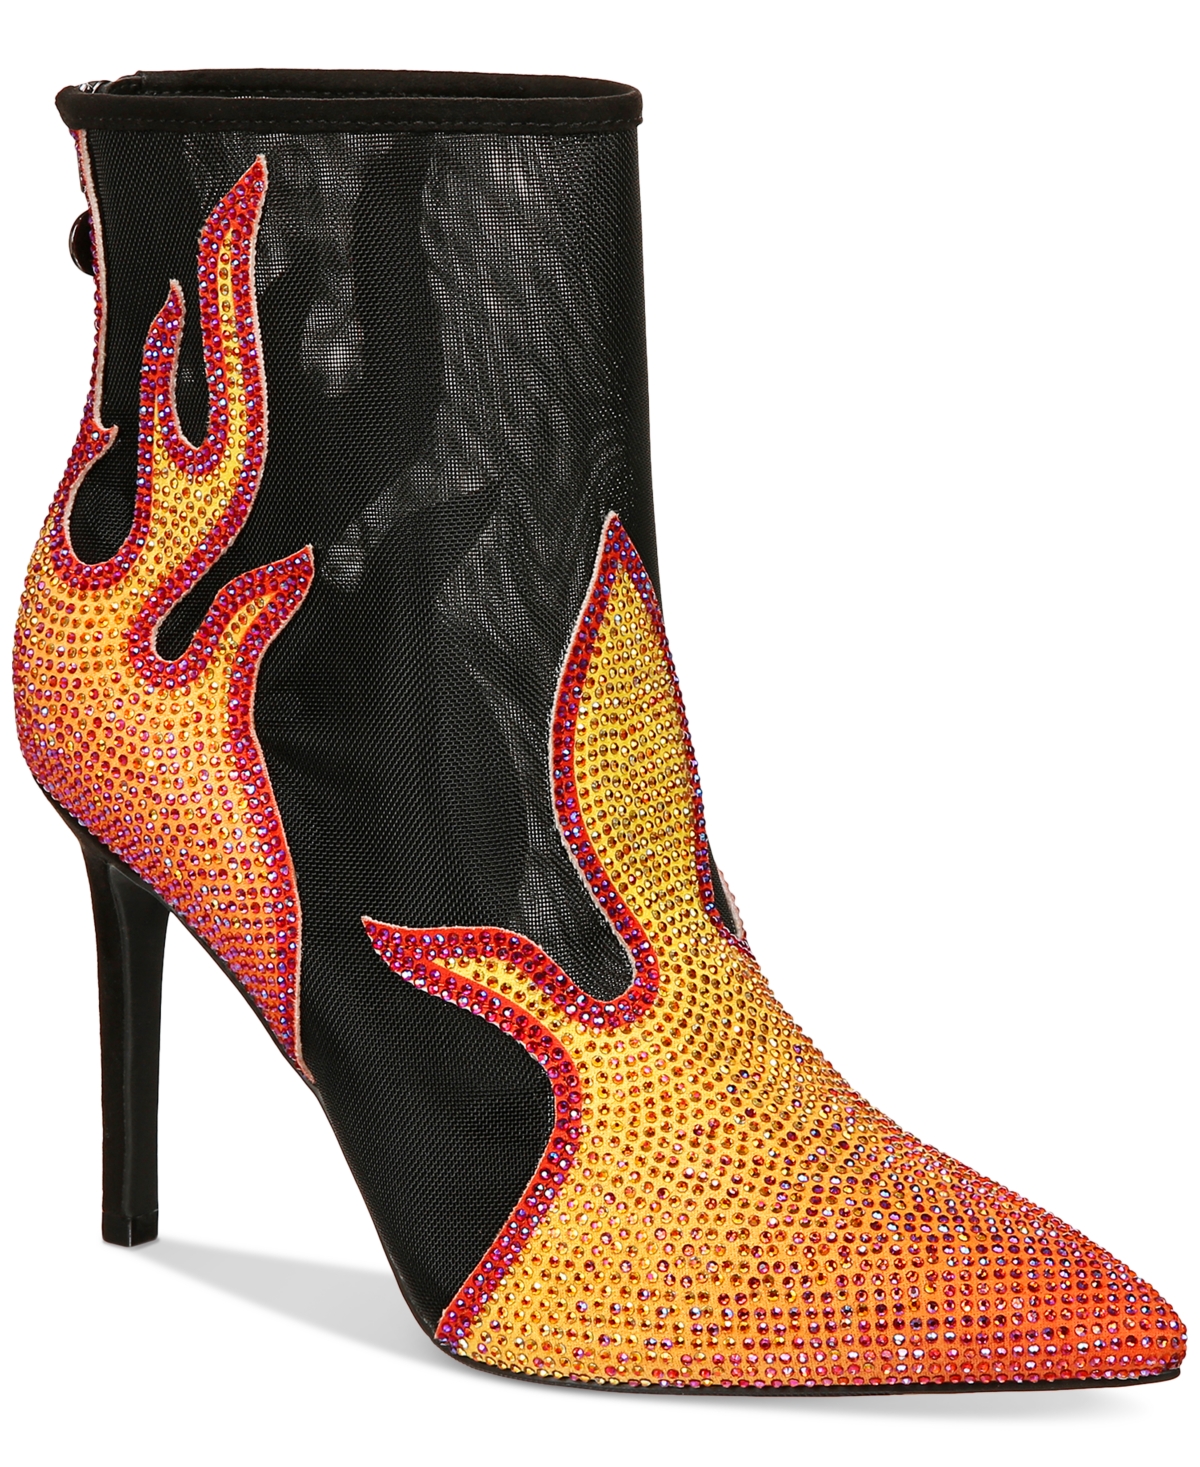 Women's Rayenn Embellished Pointed-Toe Dress Booties - Red Hot Flame